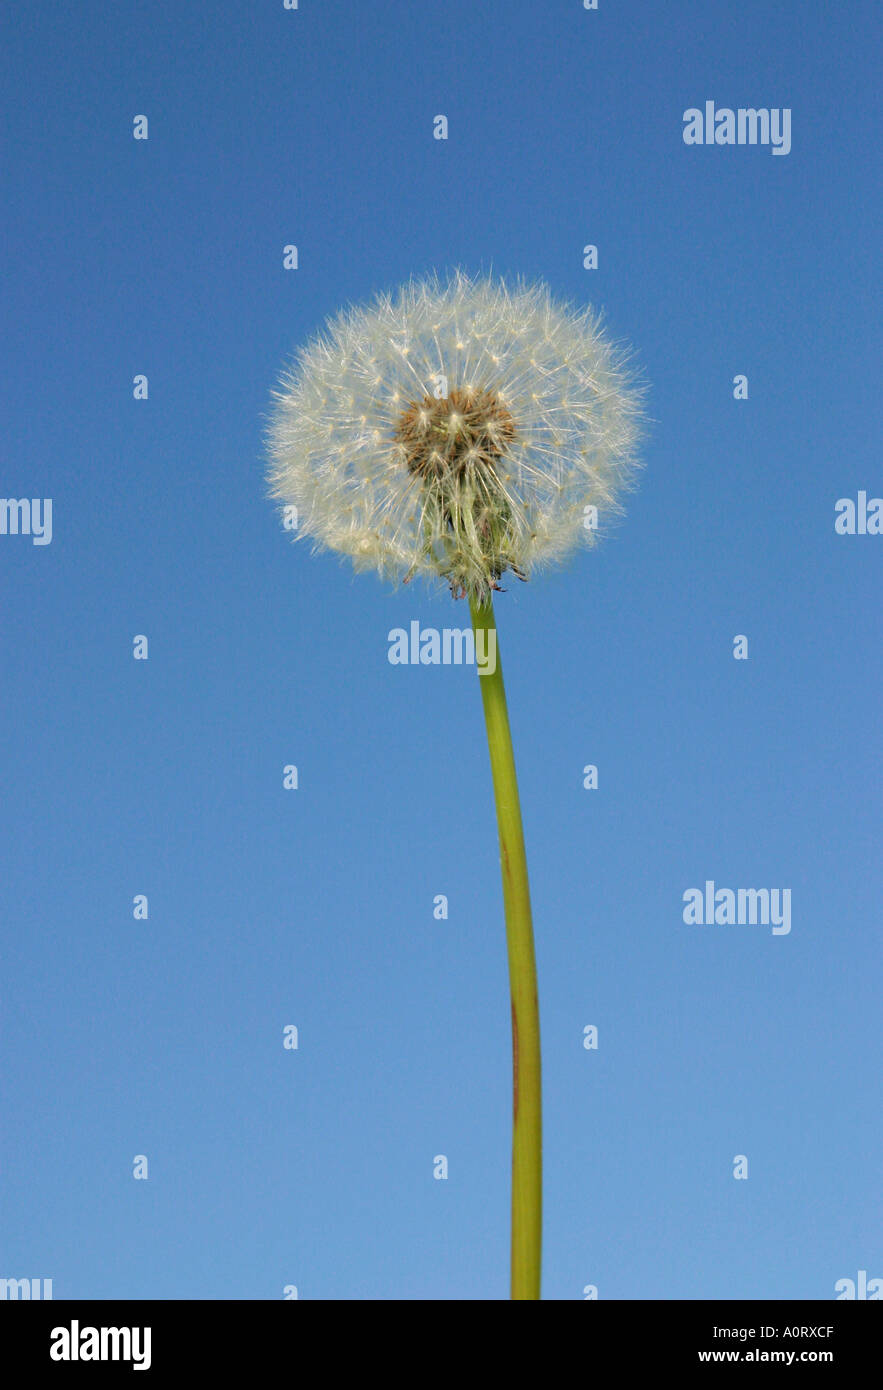 Close up of Dandelion stalk and seedhead with seeds still present and clear blue sky background One of two images in a series Stock Photo